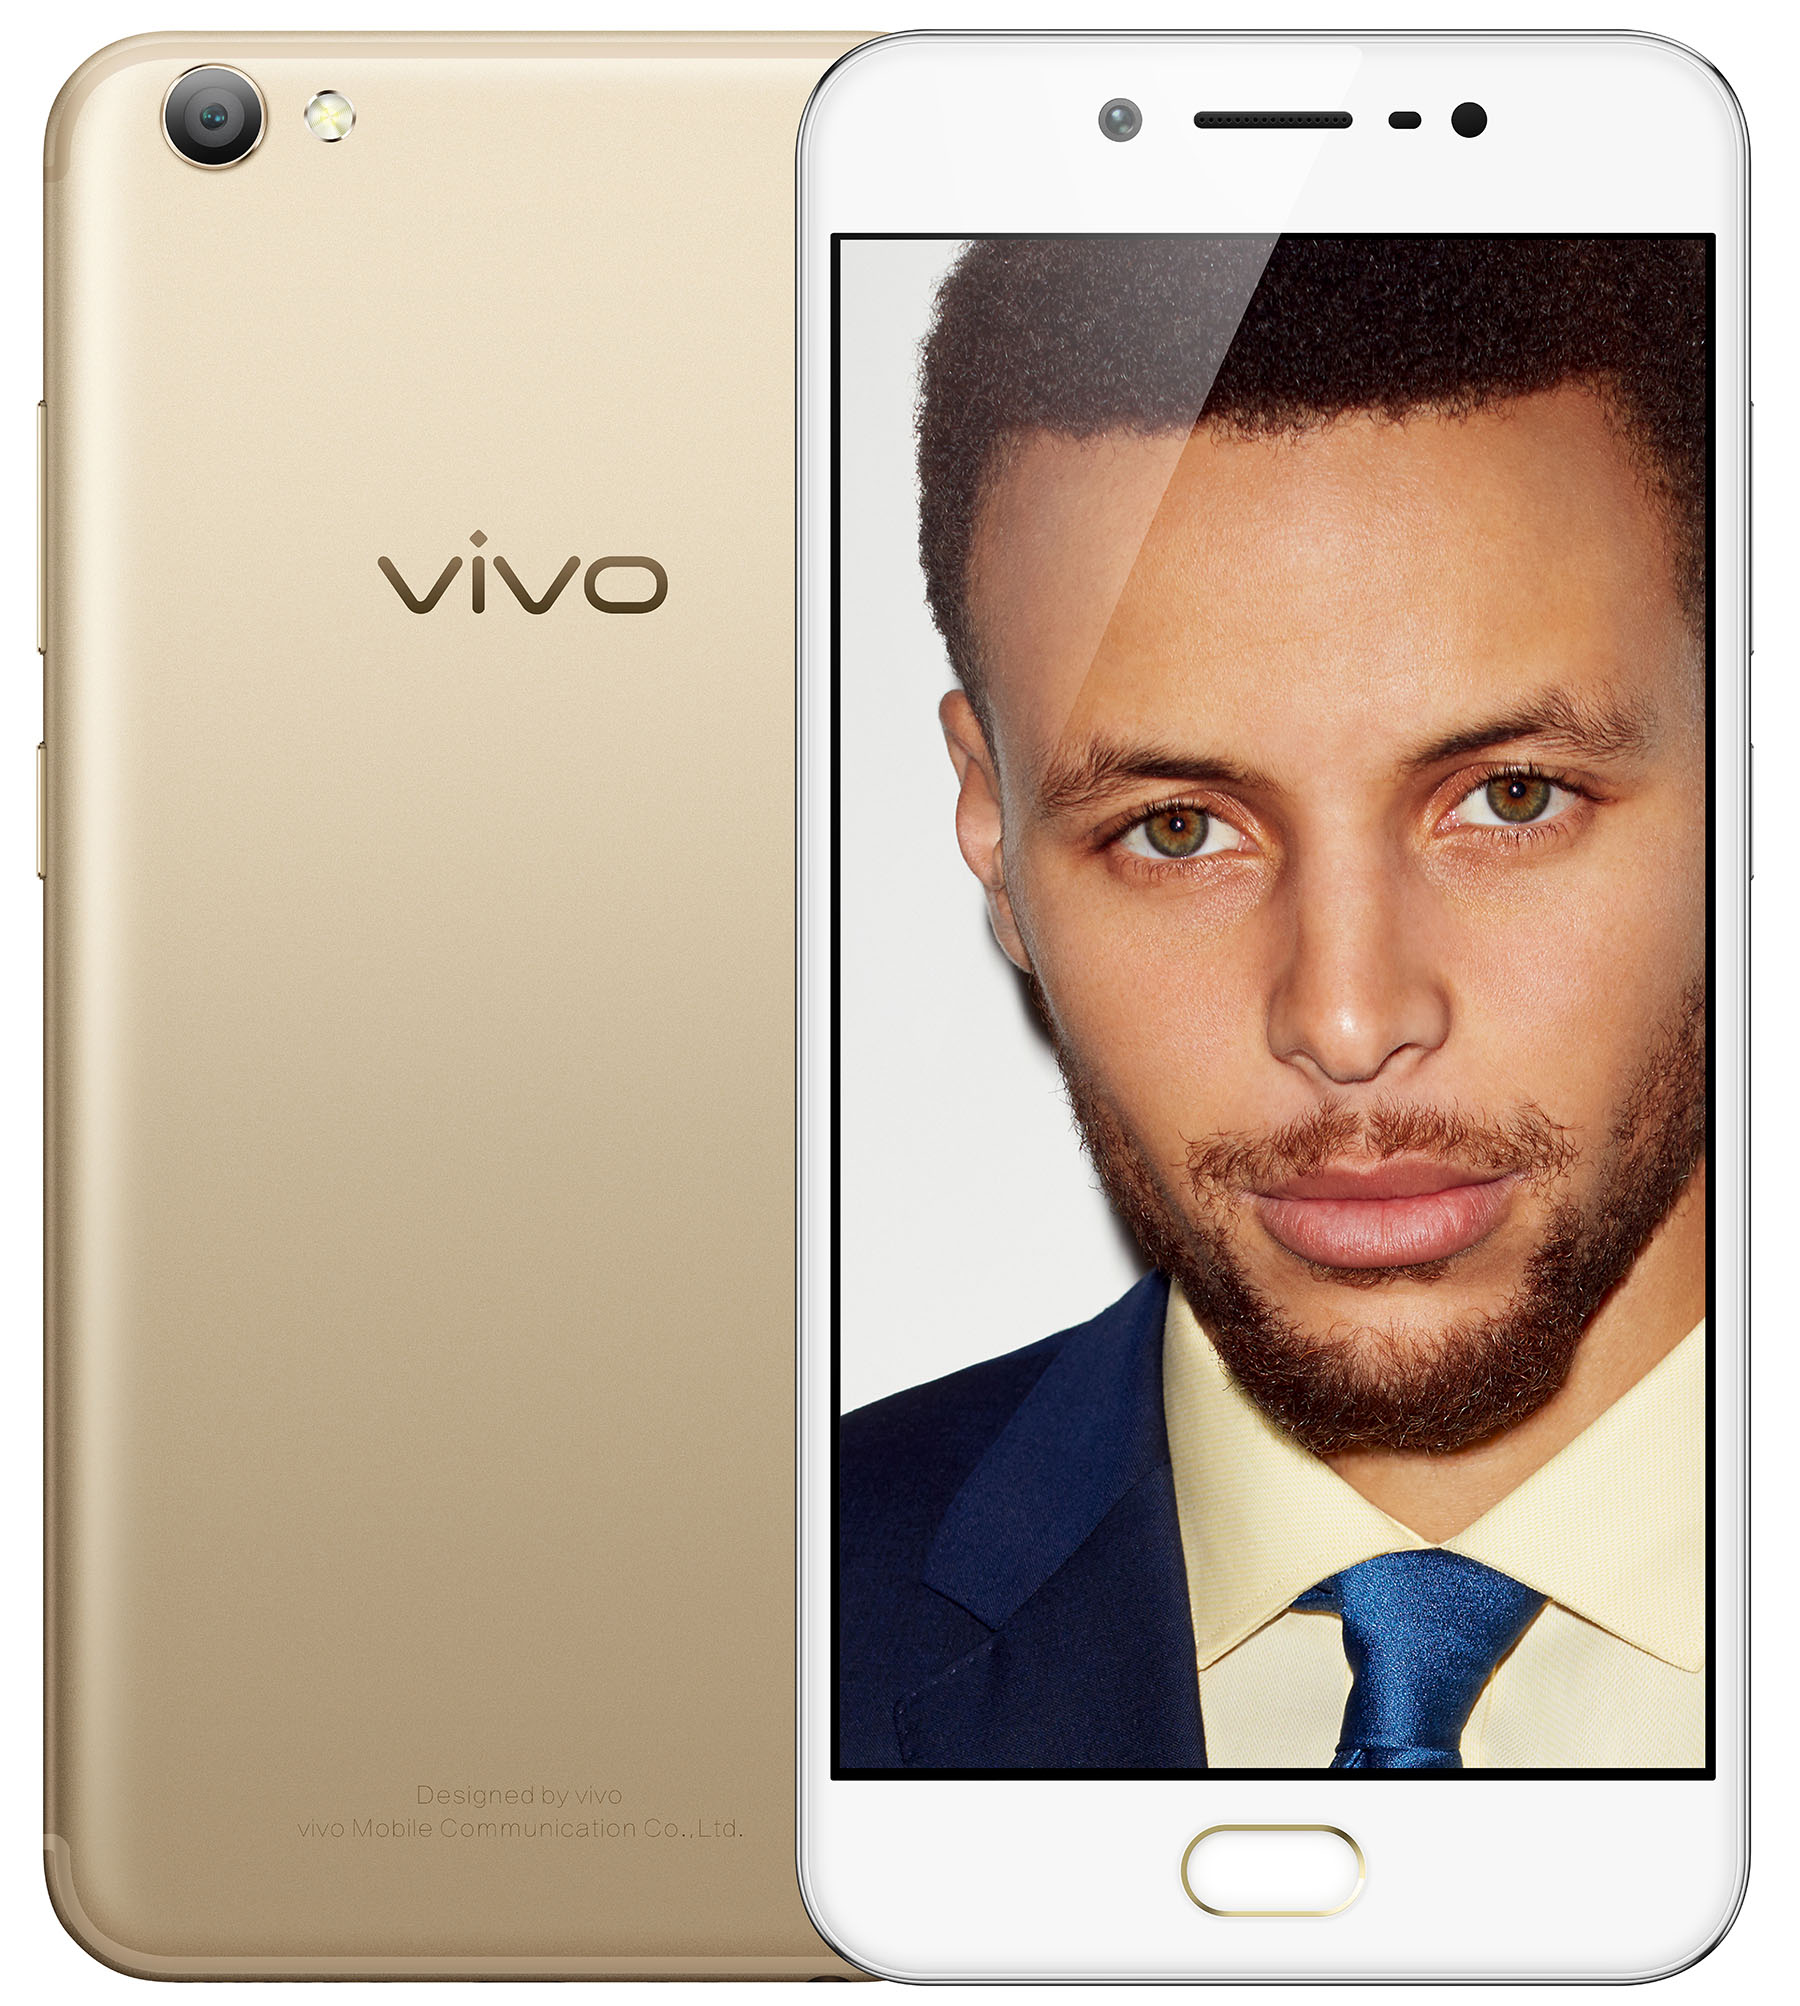 Why Stephen Curry loves the new Vivo V5s